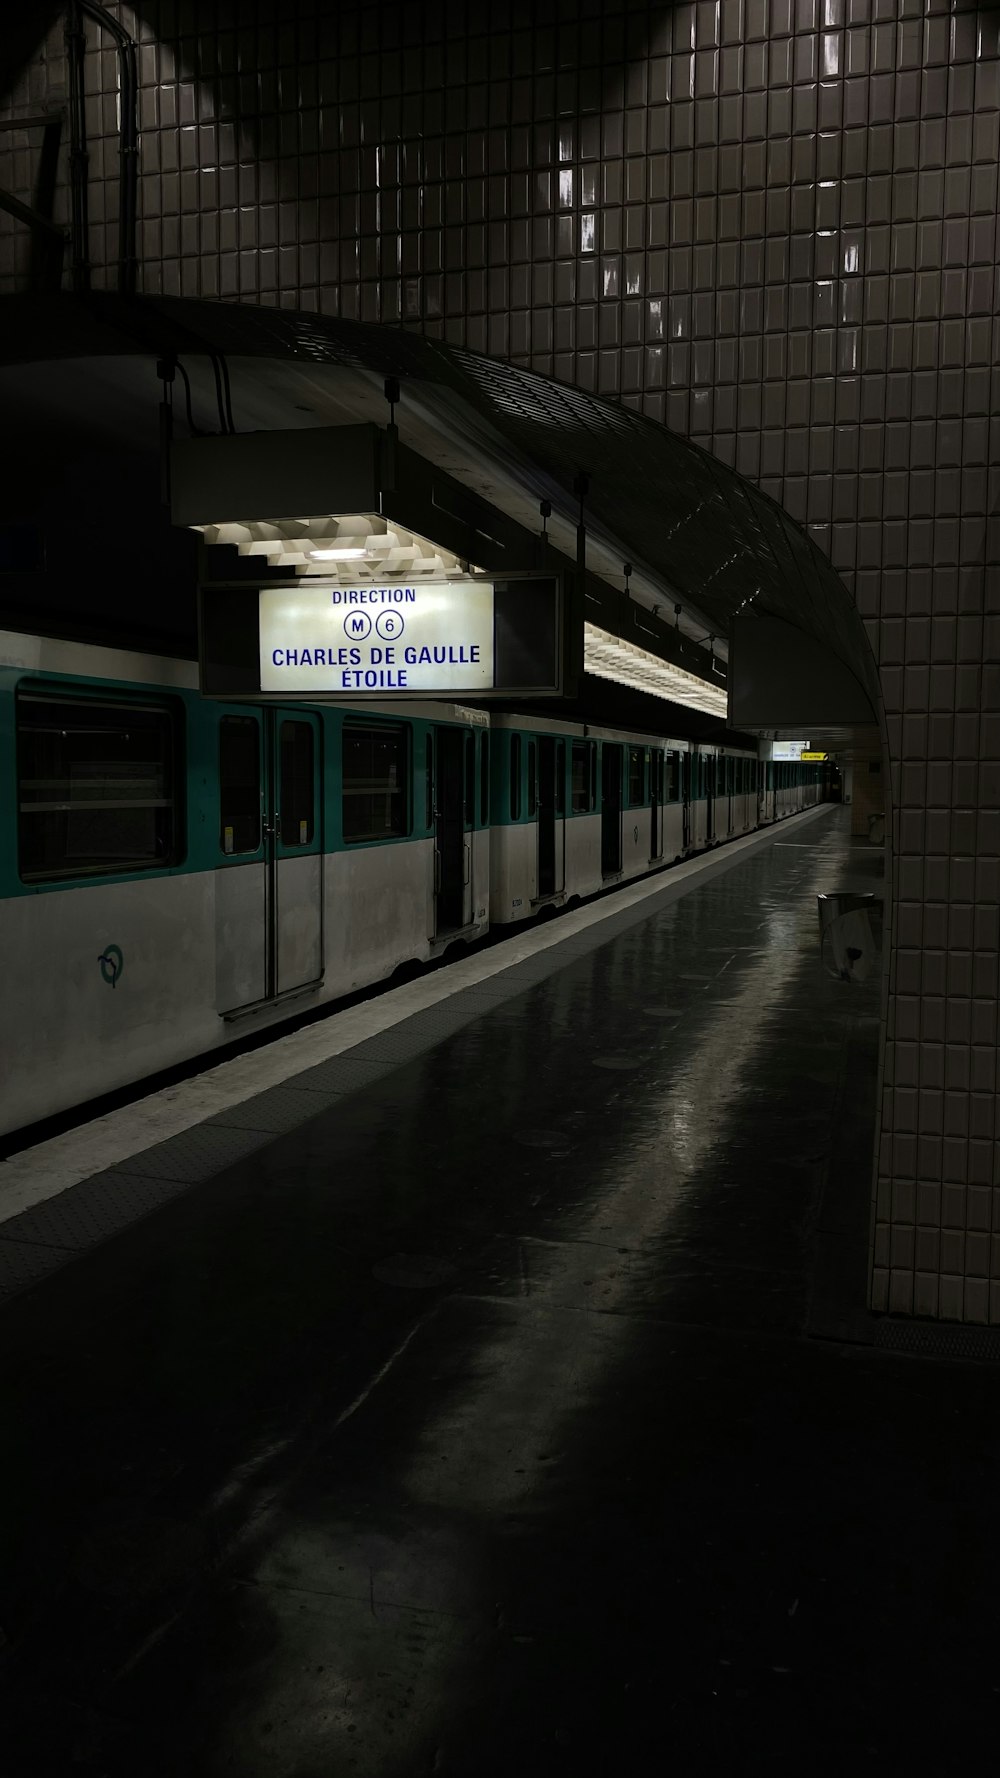 a subway train parked in a station at night